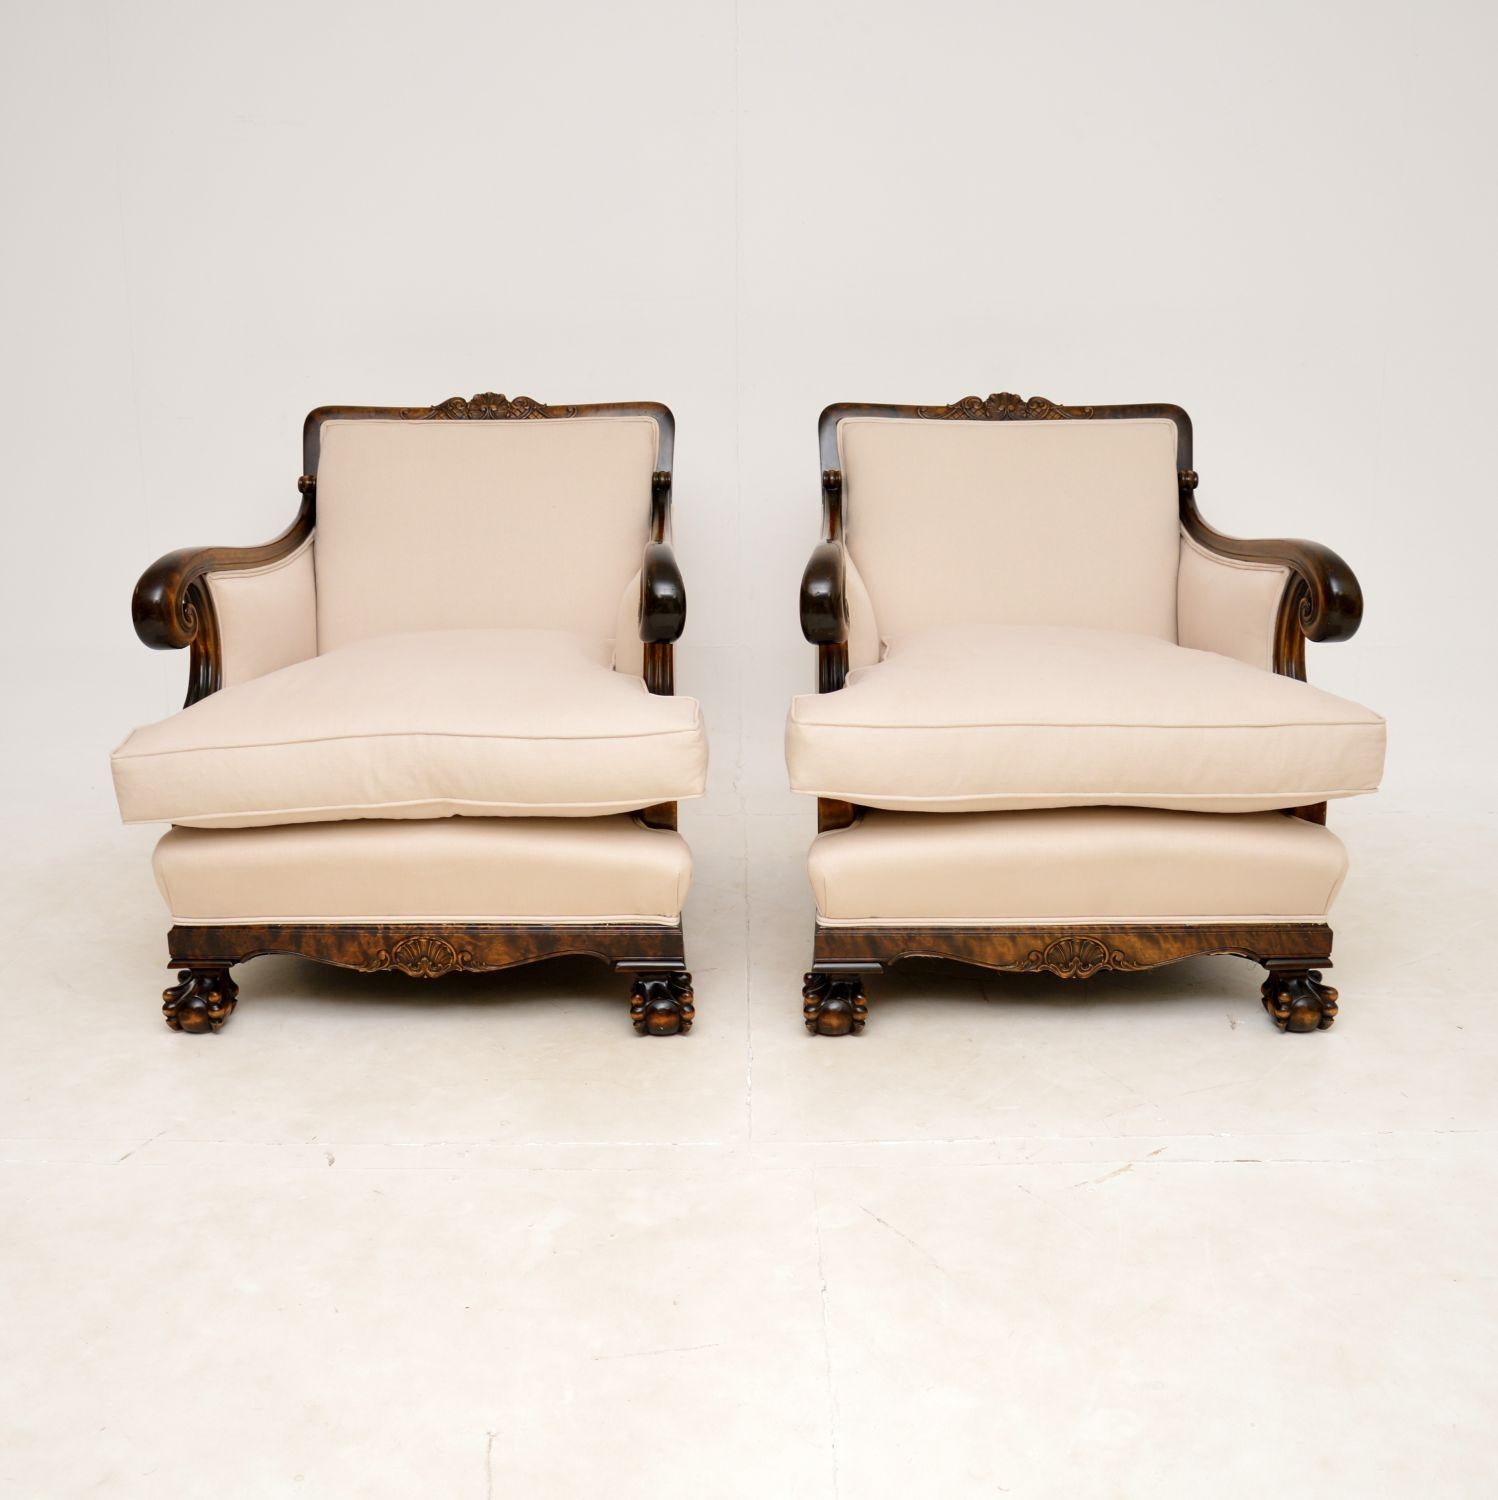 A beautiful and impressive pair of antique Swedish armchairs in satin birch. They were recently imported from Sweden, they date from around the 1900-1910 perod.

The quality is outstanding, they are very well built, generous in proportions and are